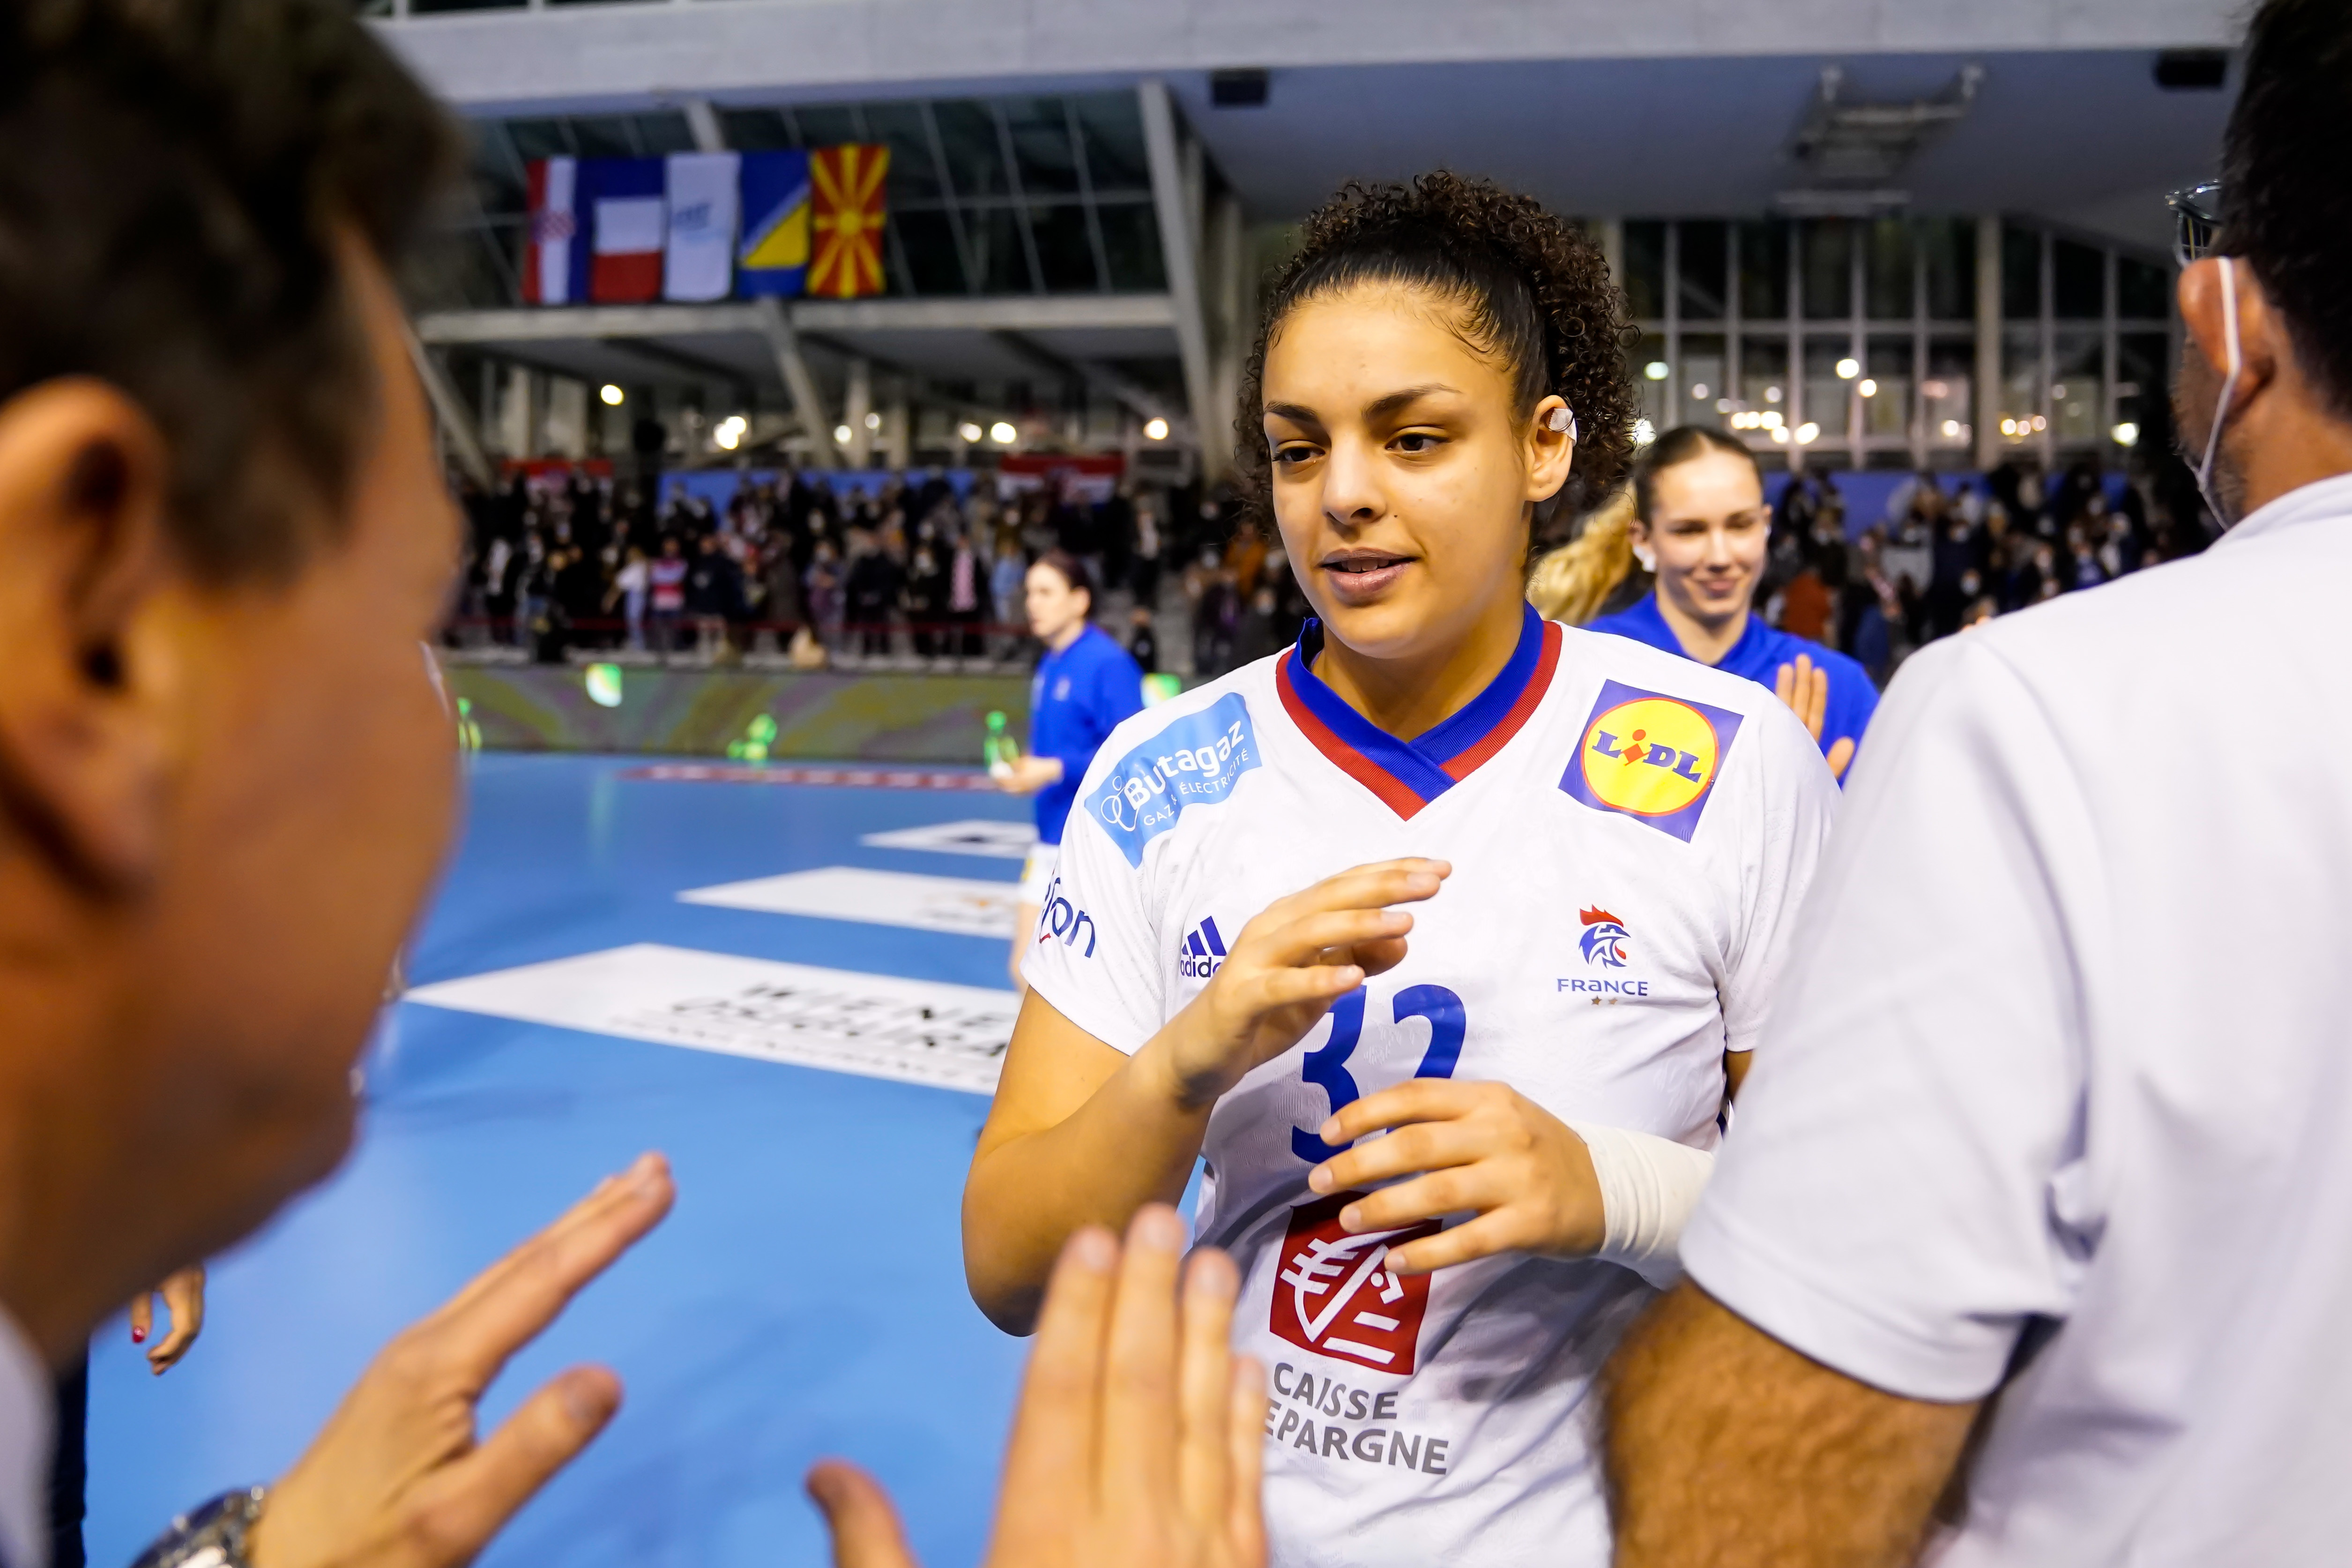 Sarah BOUKTIT of France celebrate during the women's EHF Euro 2022 Qualifying match between Croatia and France on March 3, 2022 in Koprivnica, Croatia. (Photo by Hugo Pfeiffer/Icon Sport)